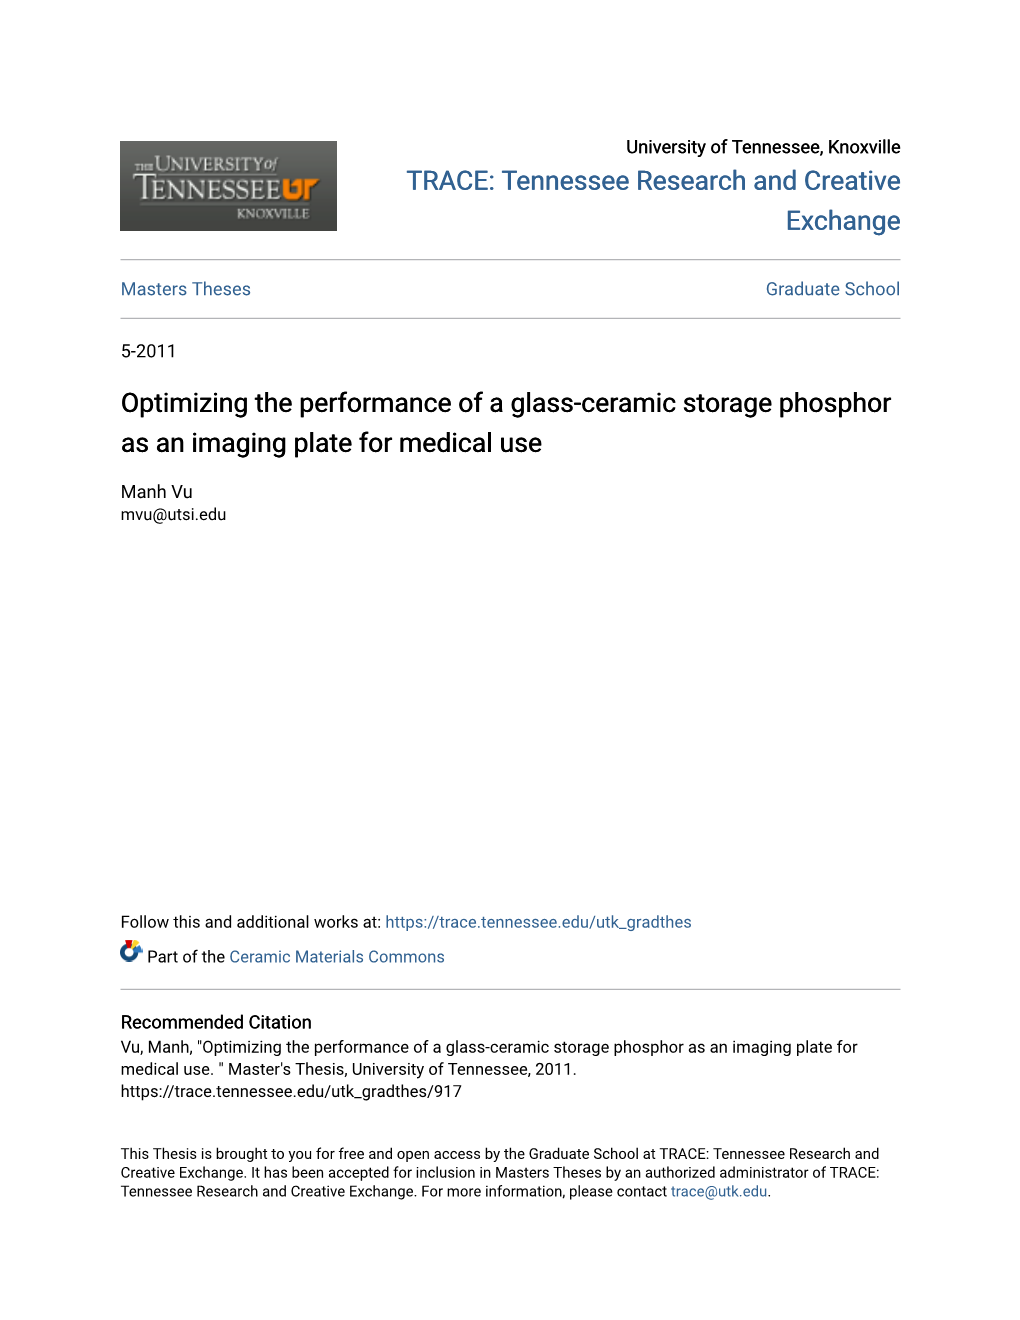 Optimizing the Performance of a Glass-Ceramic Storage Phosphor As an Imaging Plate for Medical Use